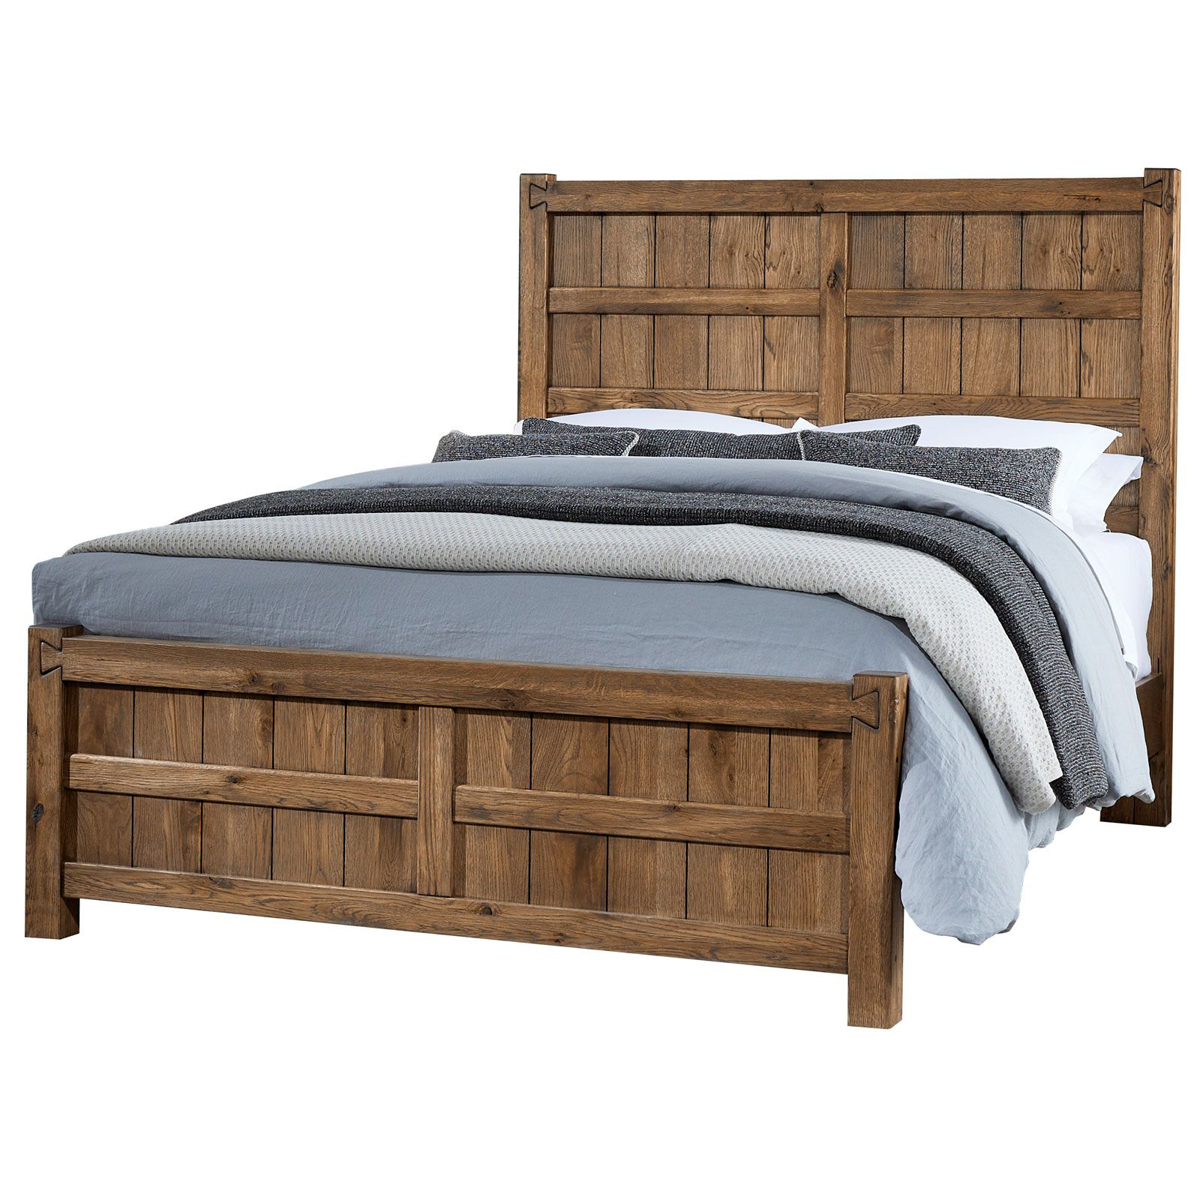 Picture of Natural Board & Batten Queen Bed